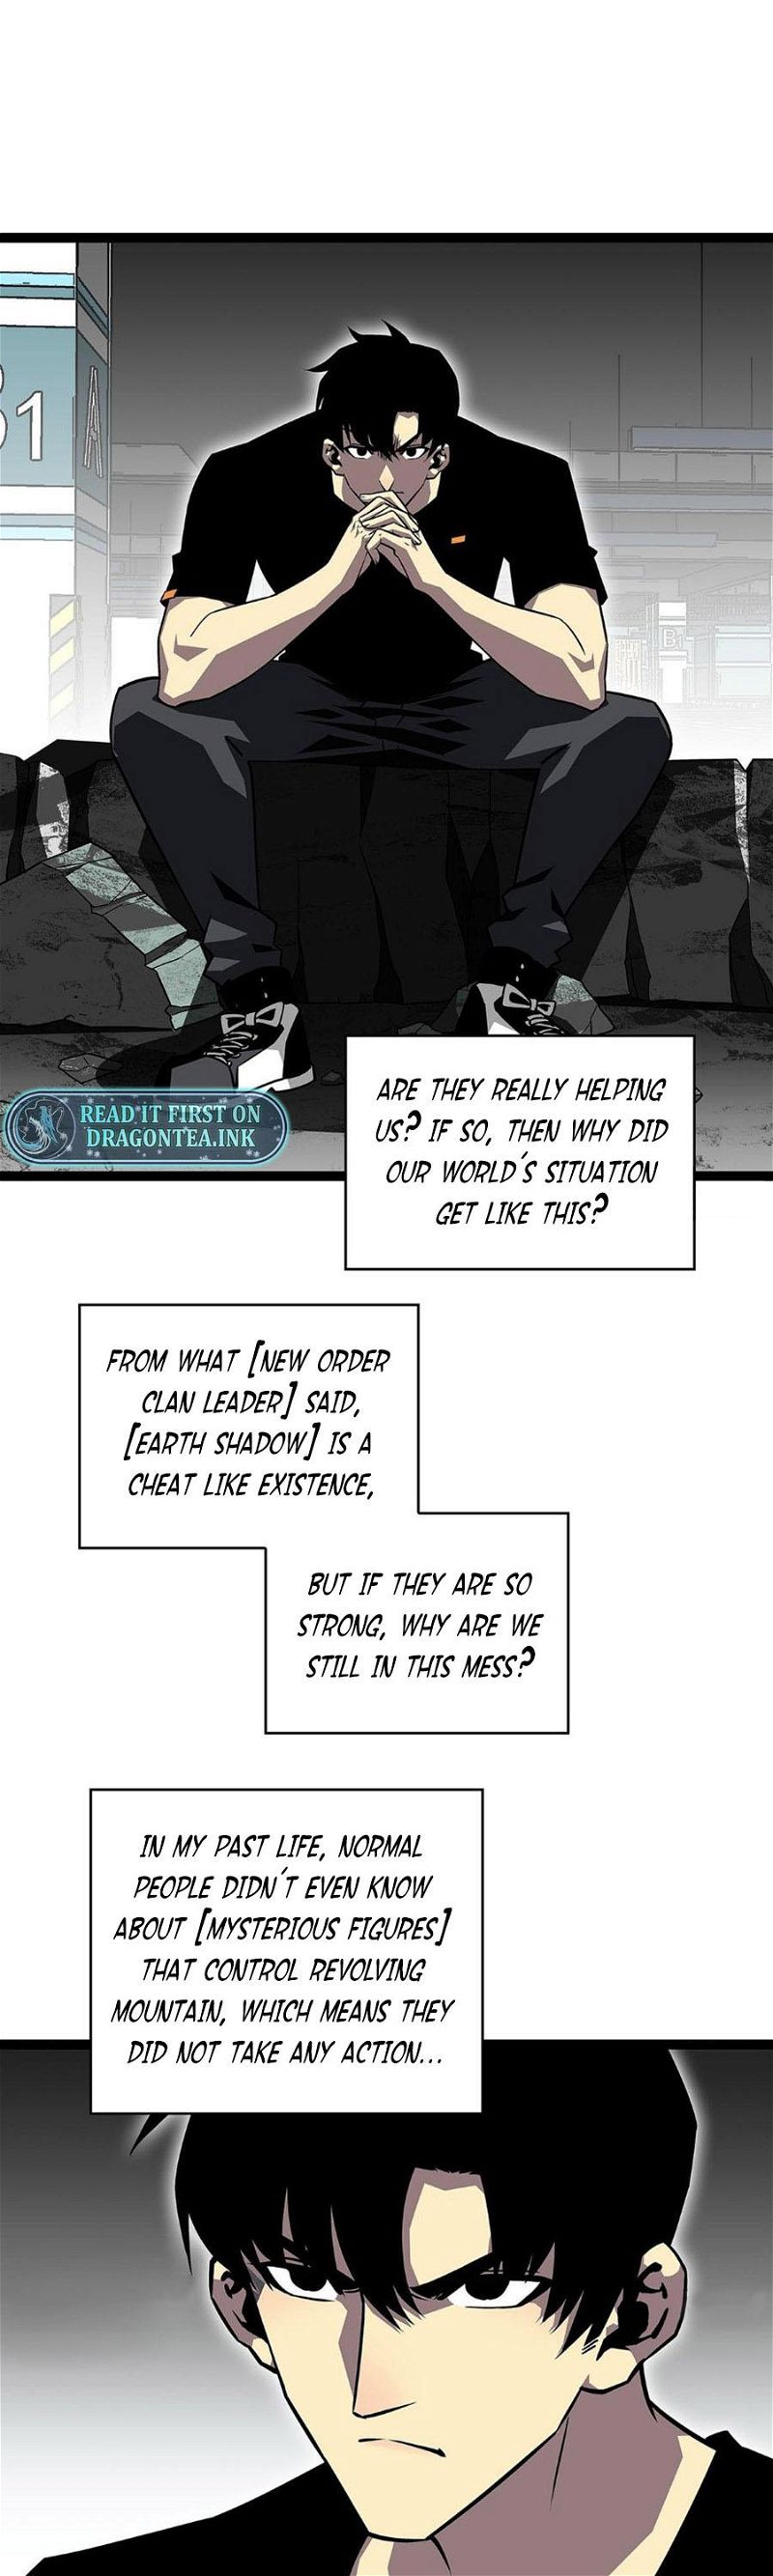 It all starts with playing game seriously Chapter 115 page 8 - MangaWeebs.in